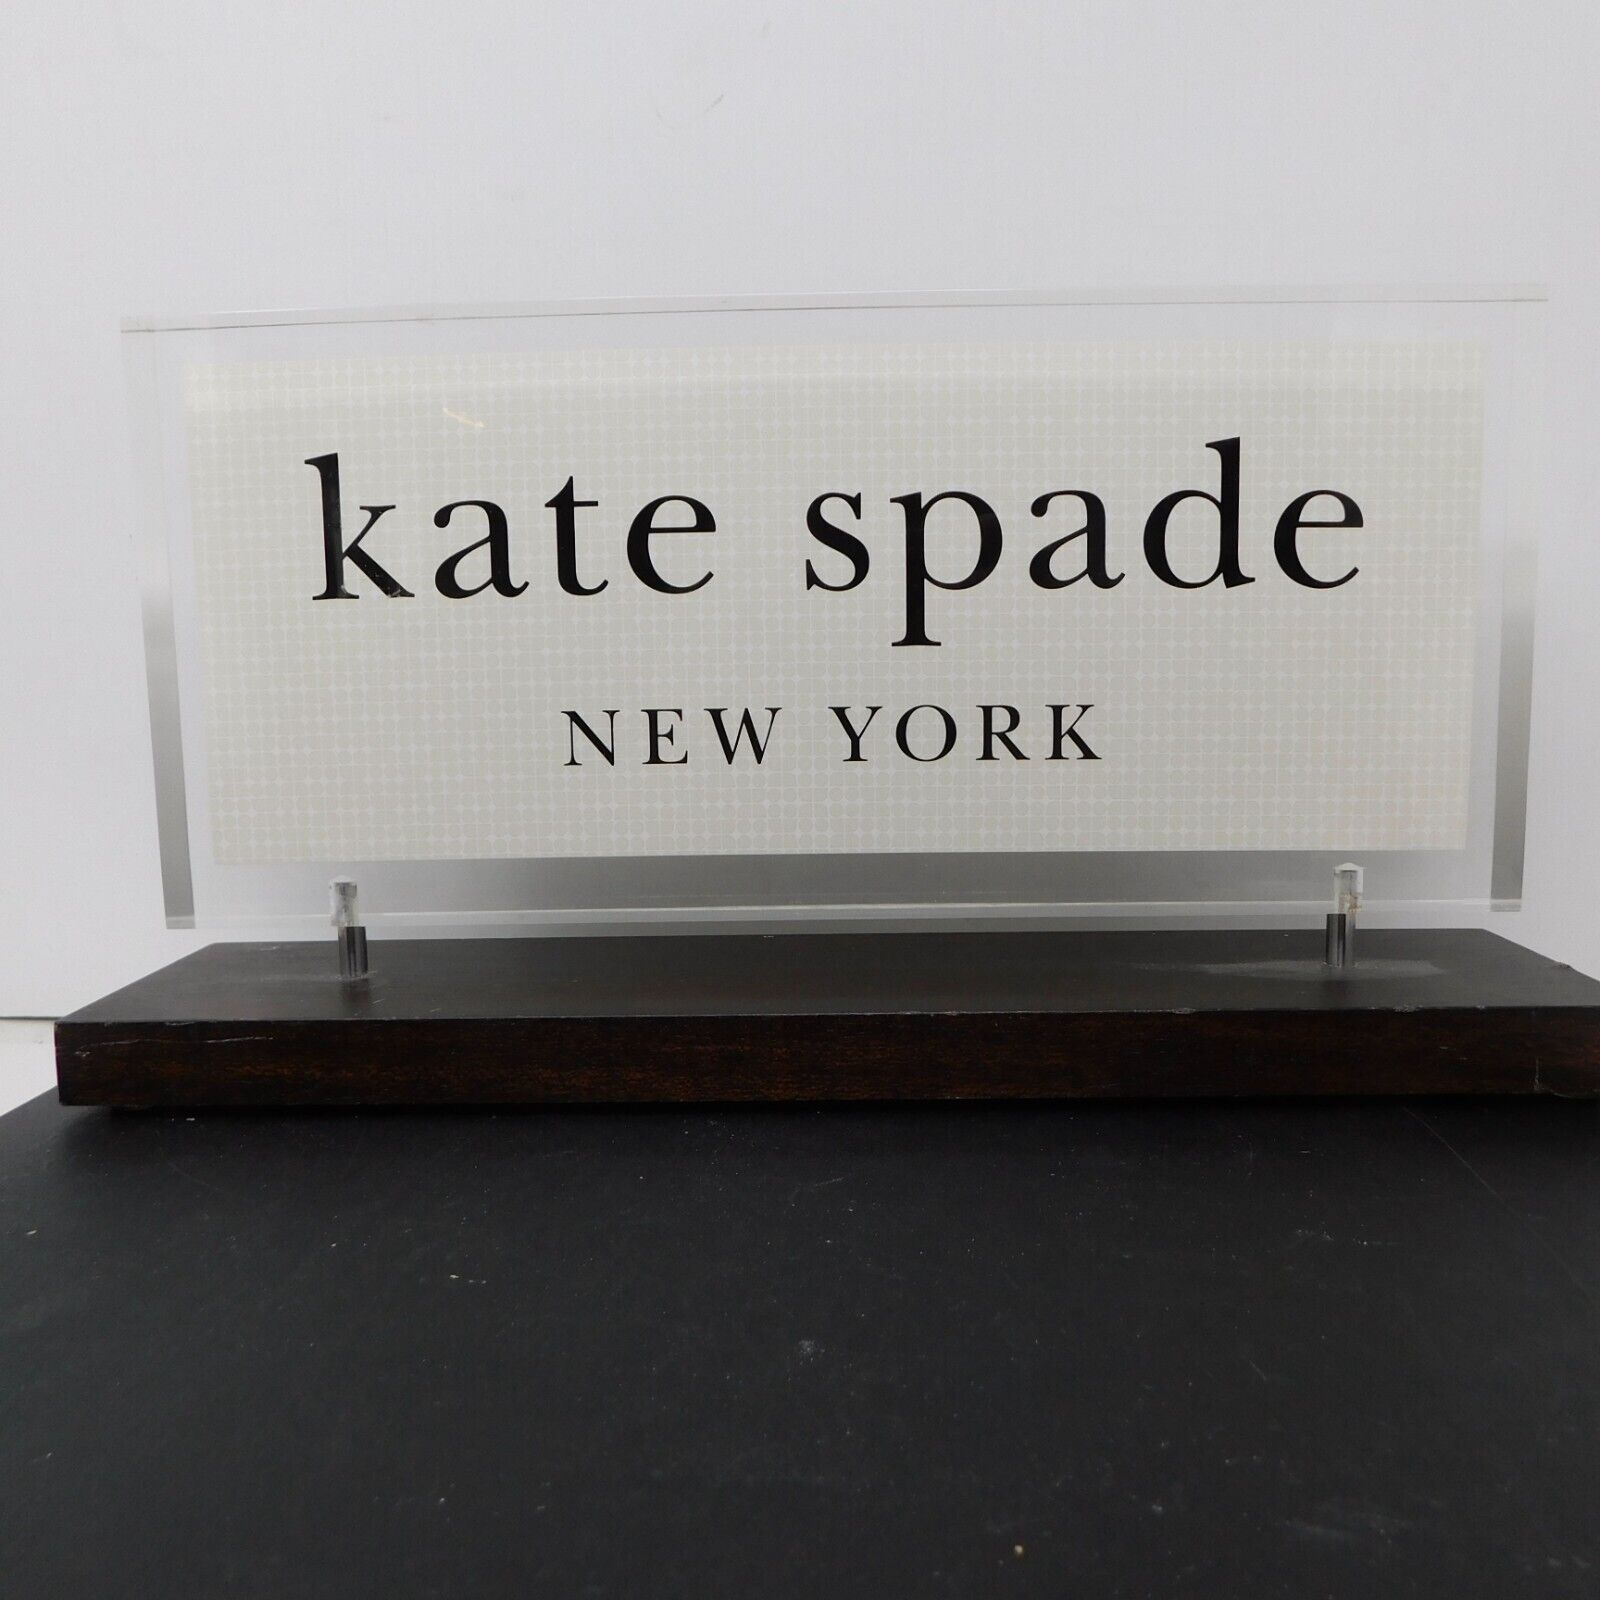 KATE SPADE New York Store Display Sign Promotional Clear Lucite Wooden Base